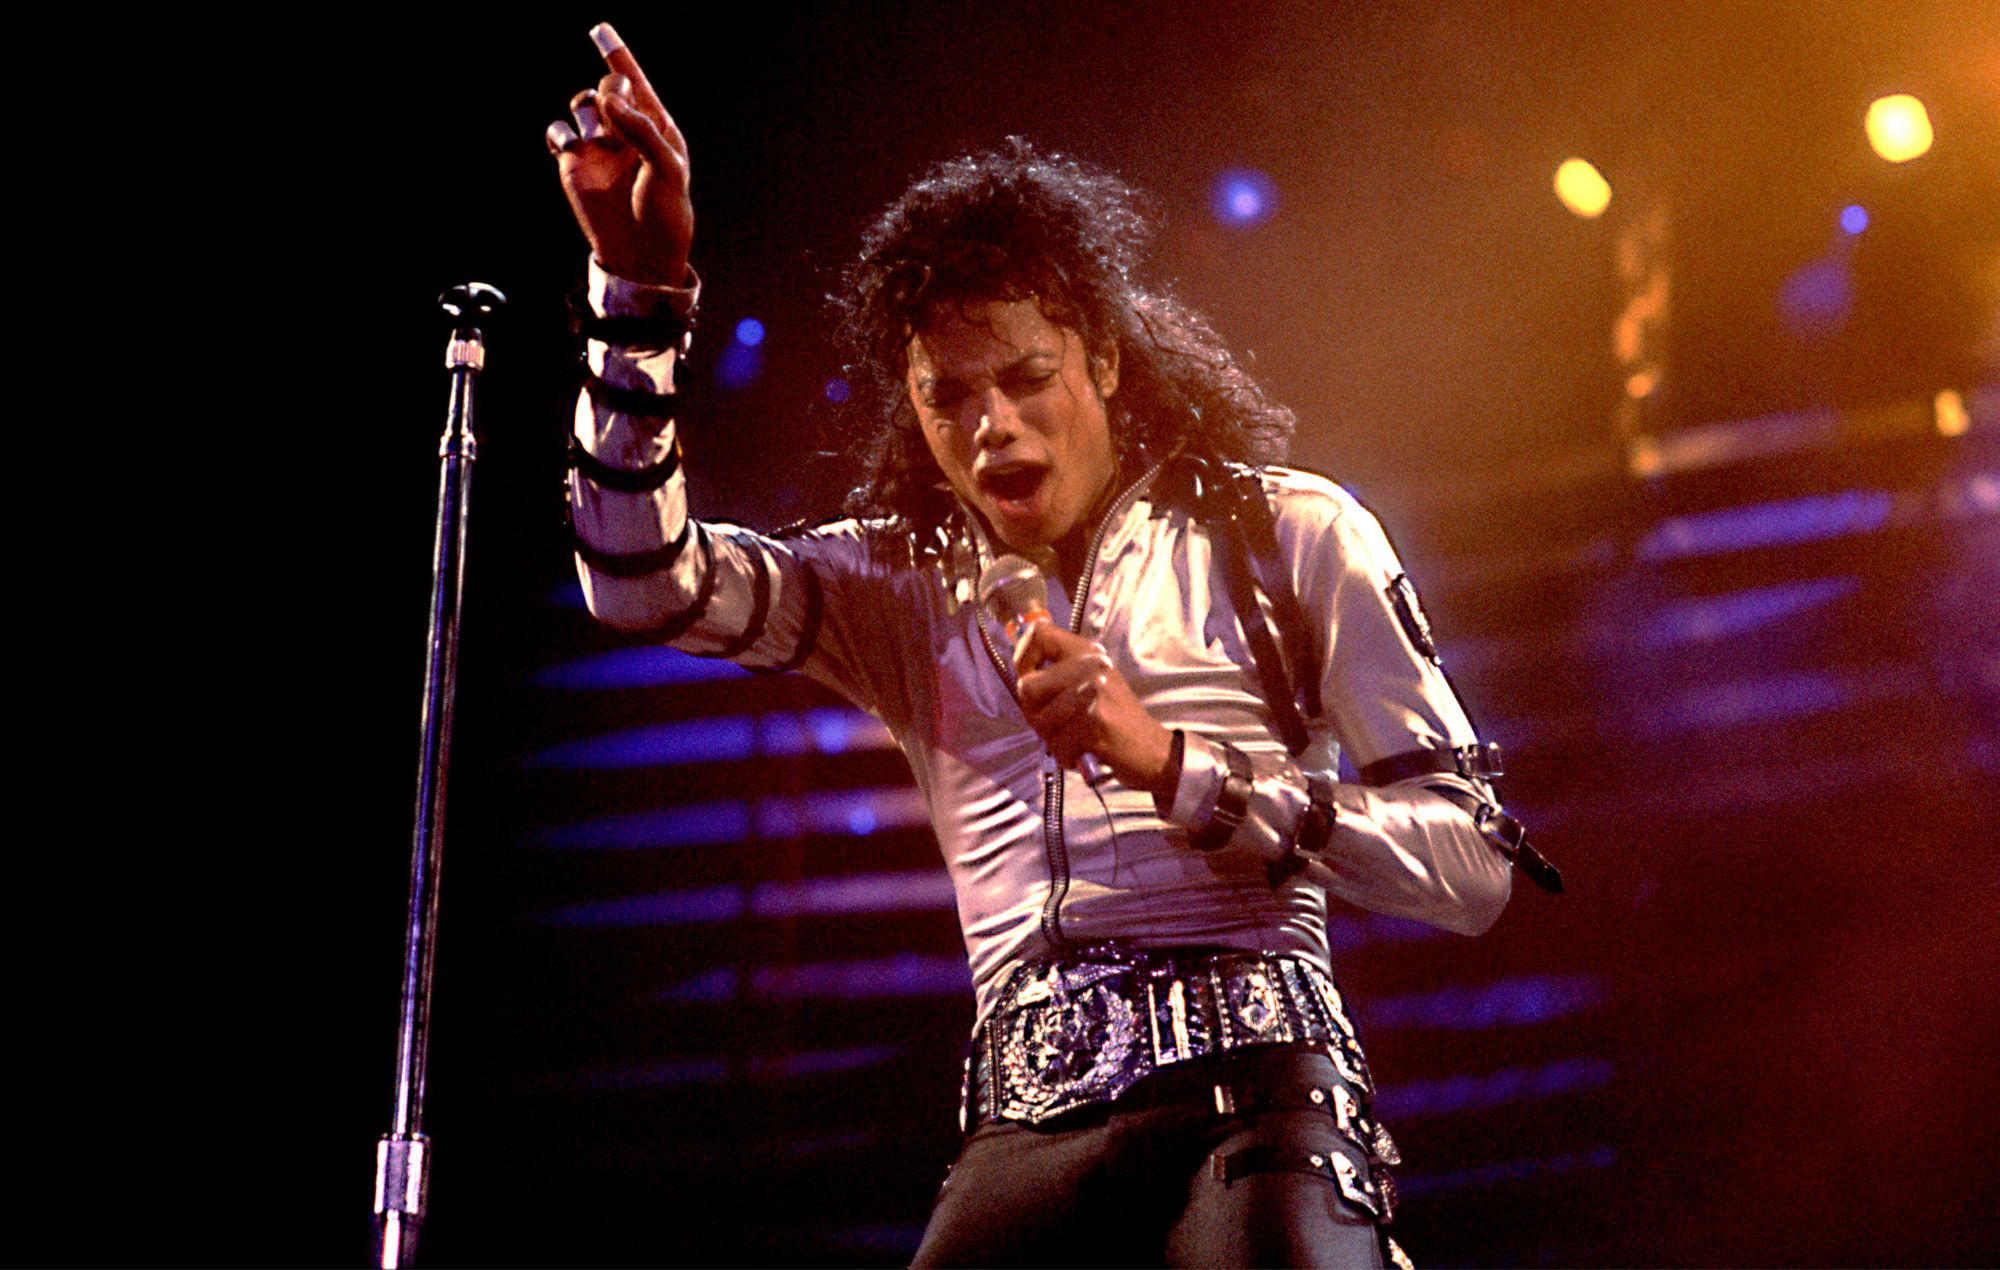 Michael Jackson performs onstage at the Rosemont Horizon during his 'BAD' tour, Rosemont, Illinois, April 19, 1988. 